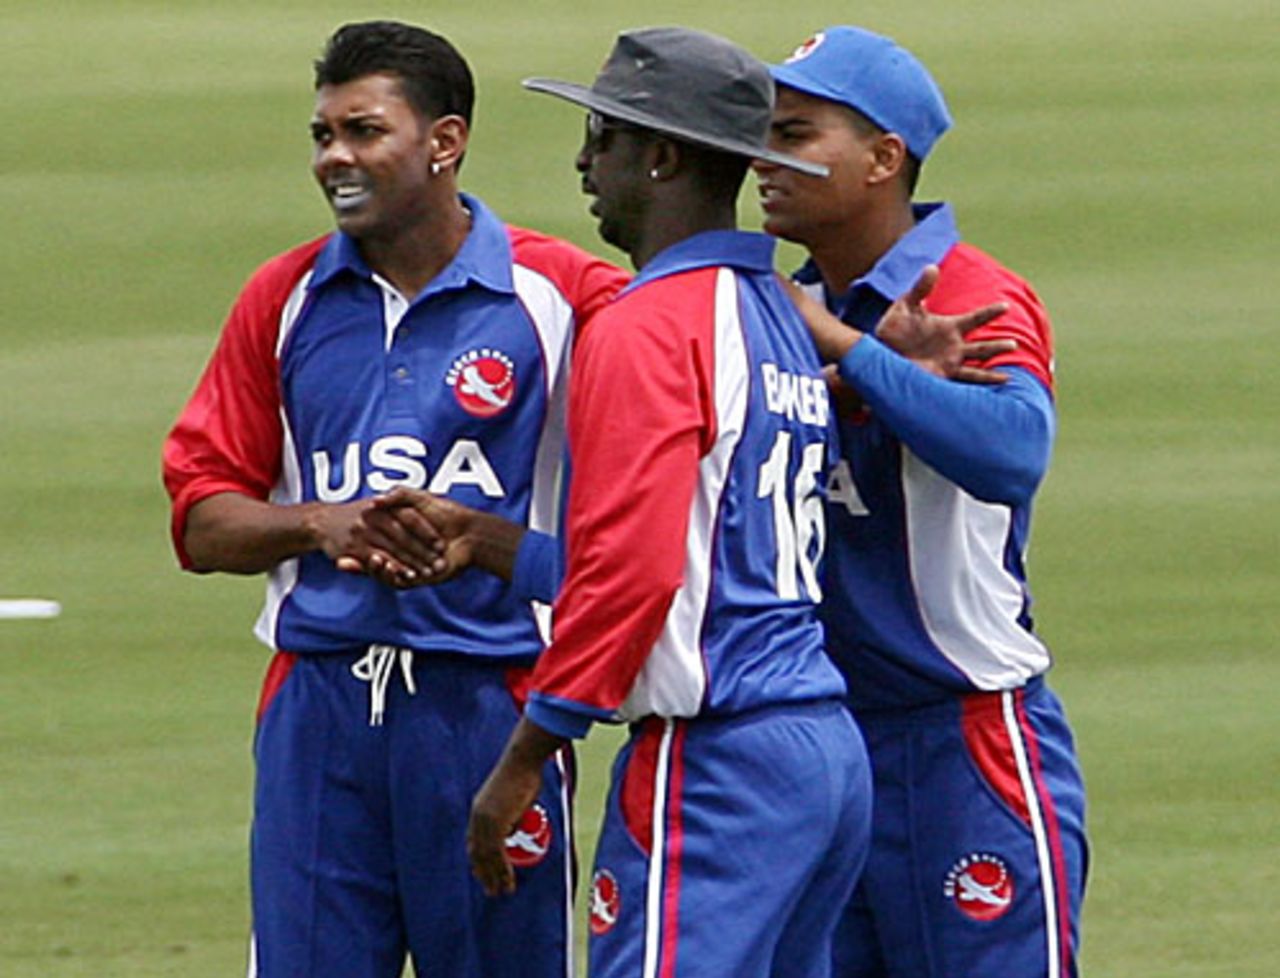 Orlando Baker is greeted by Steve Massiah and Asad Ghous after taking a catch, United States of America v Jamaica, 1st match, Lauderhill, May 21, 2010 